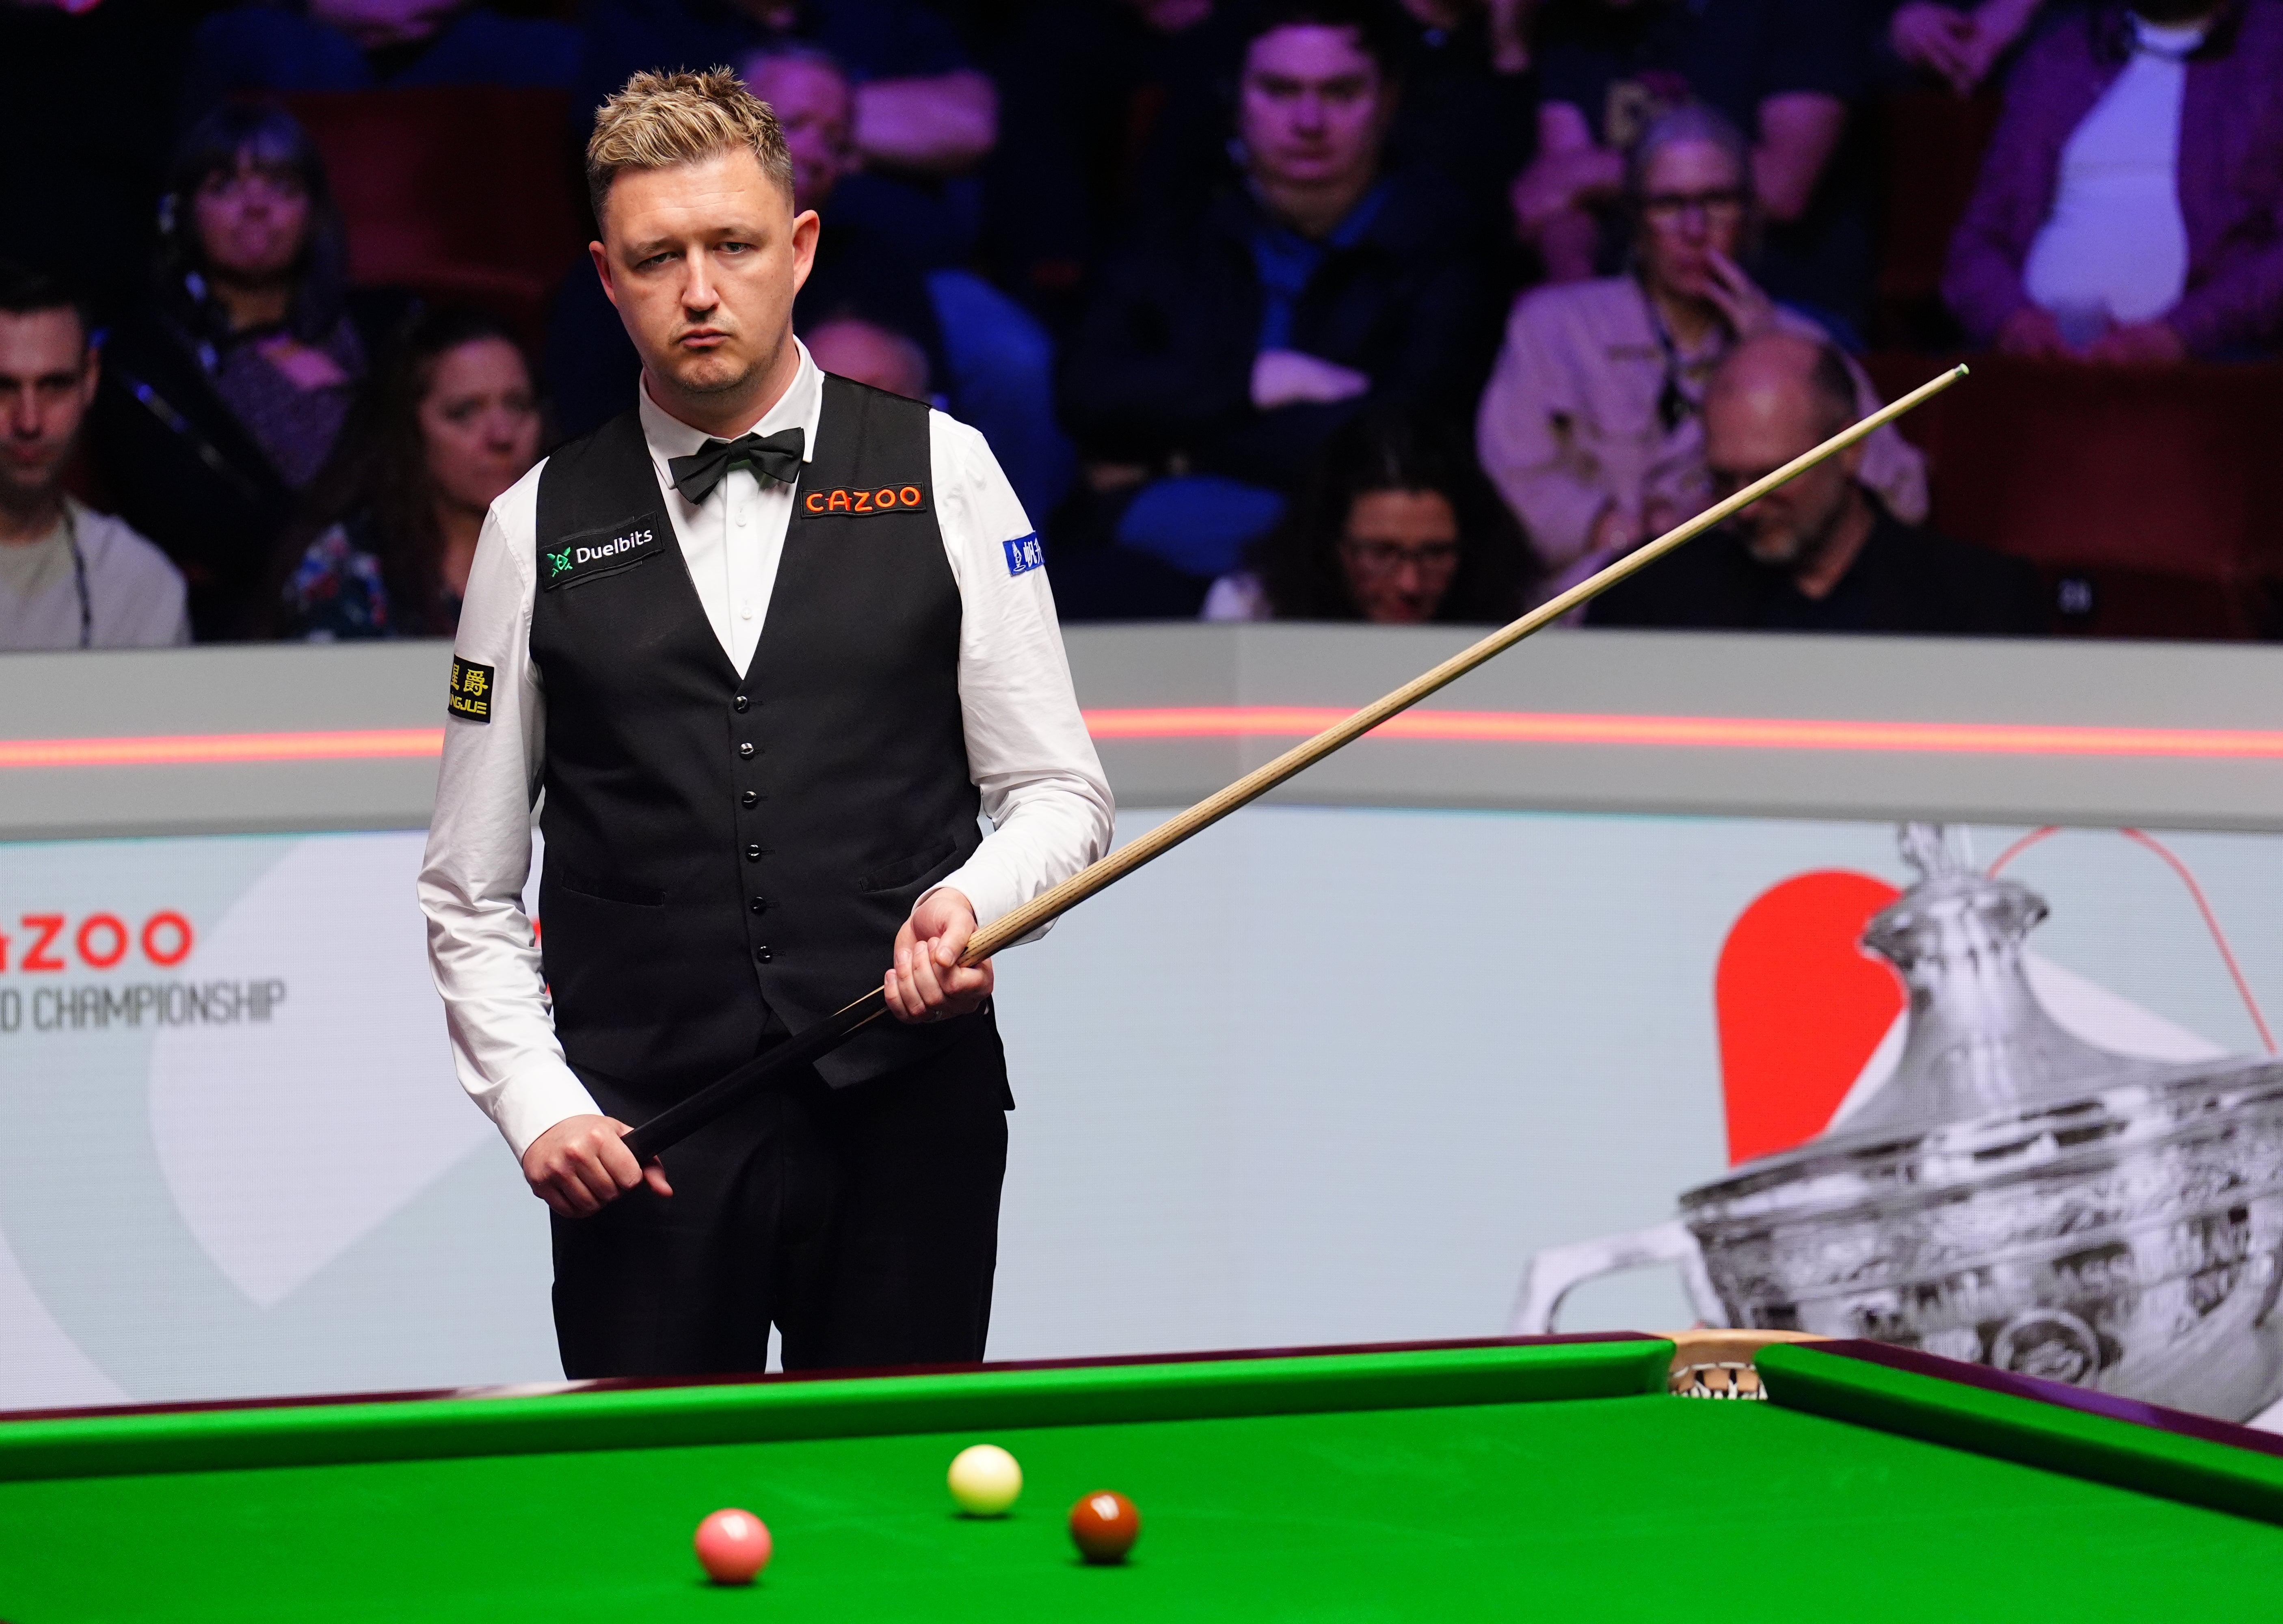 Kyren Wilson stylishly dispatched David Gilber in the semi-finals